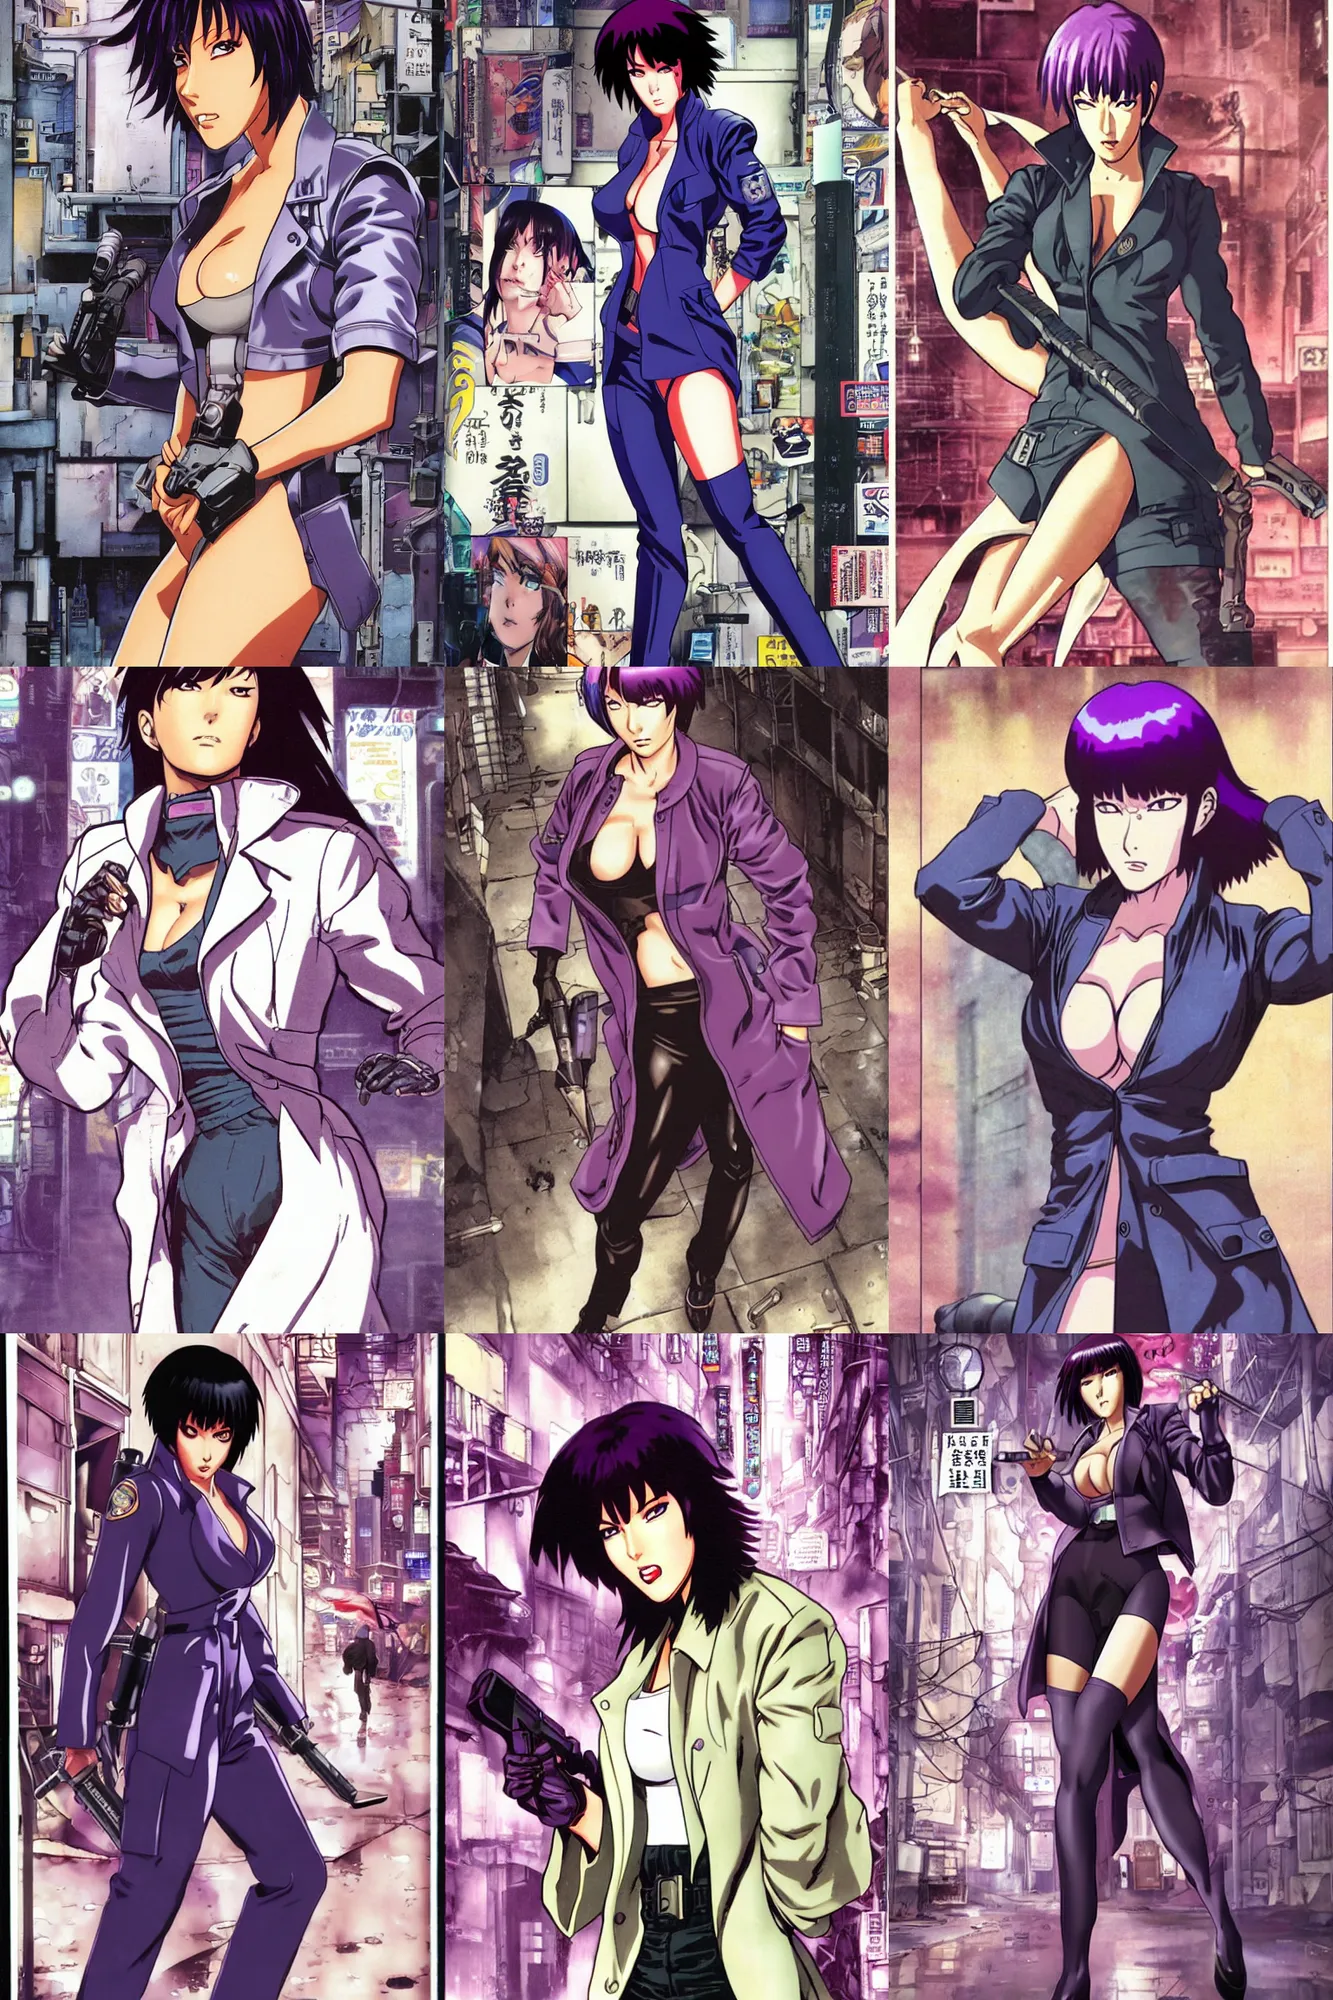 Prompt: motoko kusanagi by masamune shirow, trading card, trenchcoat, determined expression, dirty alleyway background, pin - up